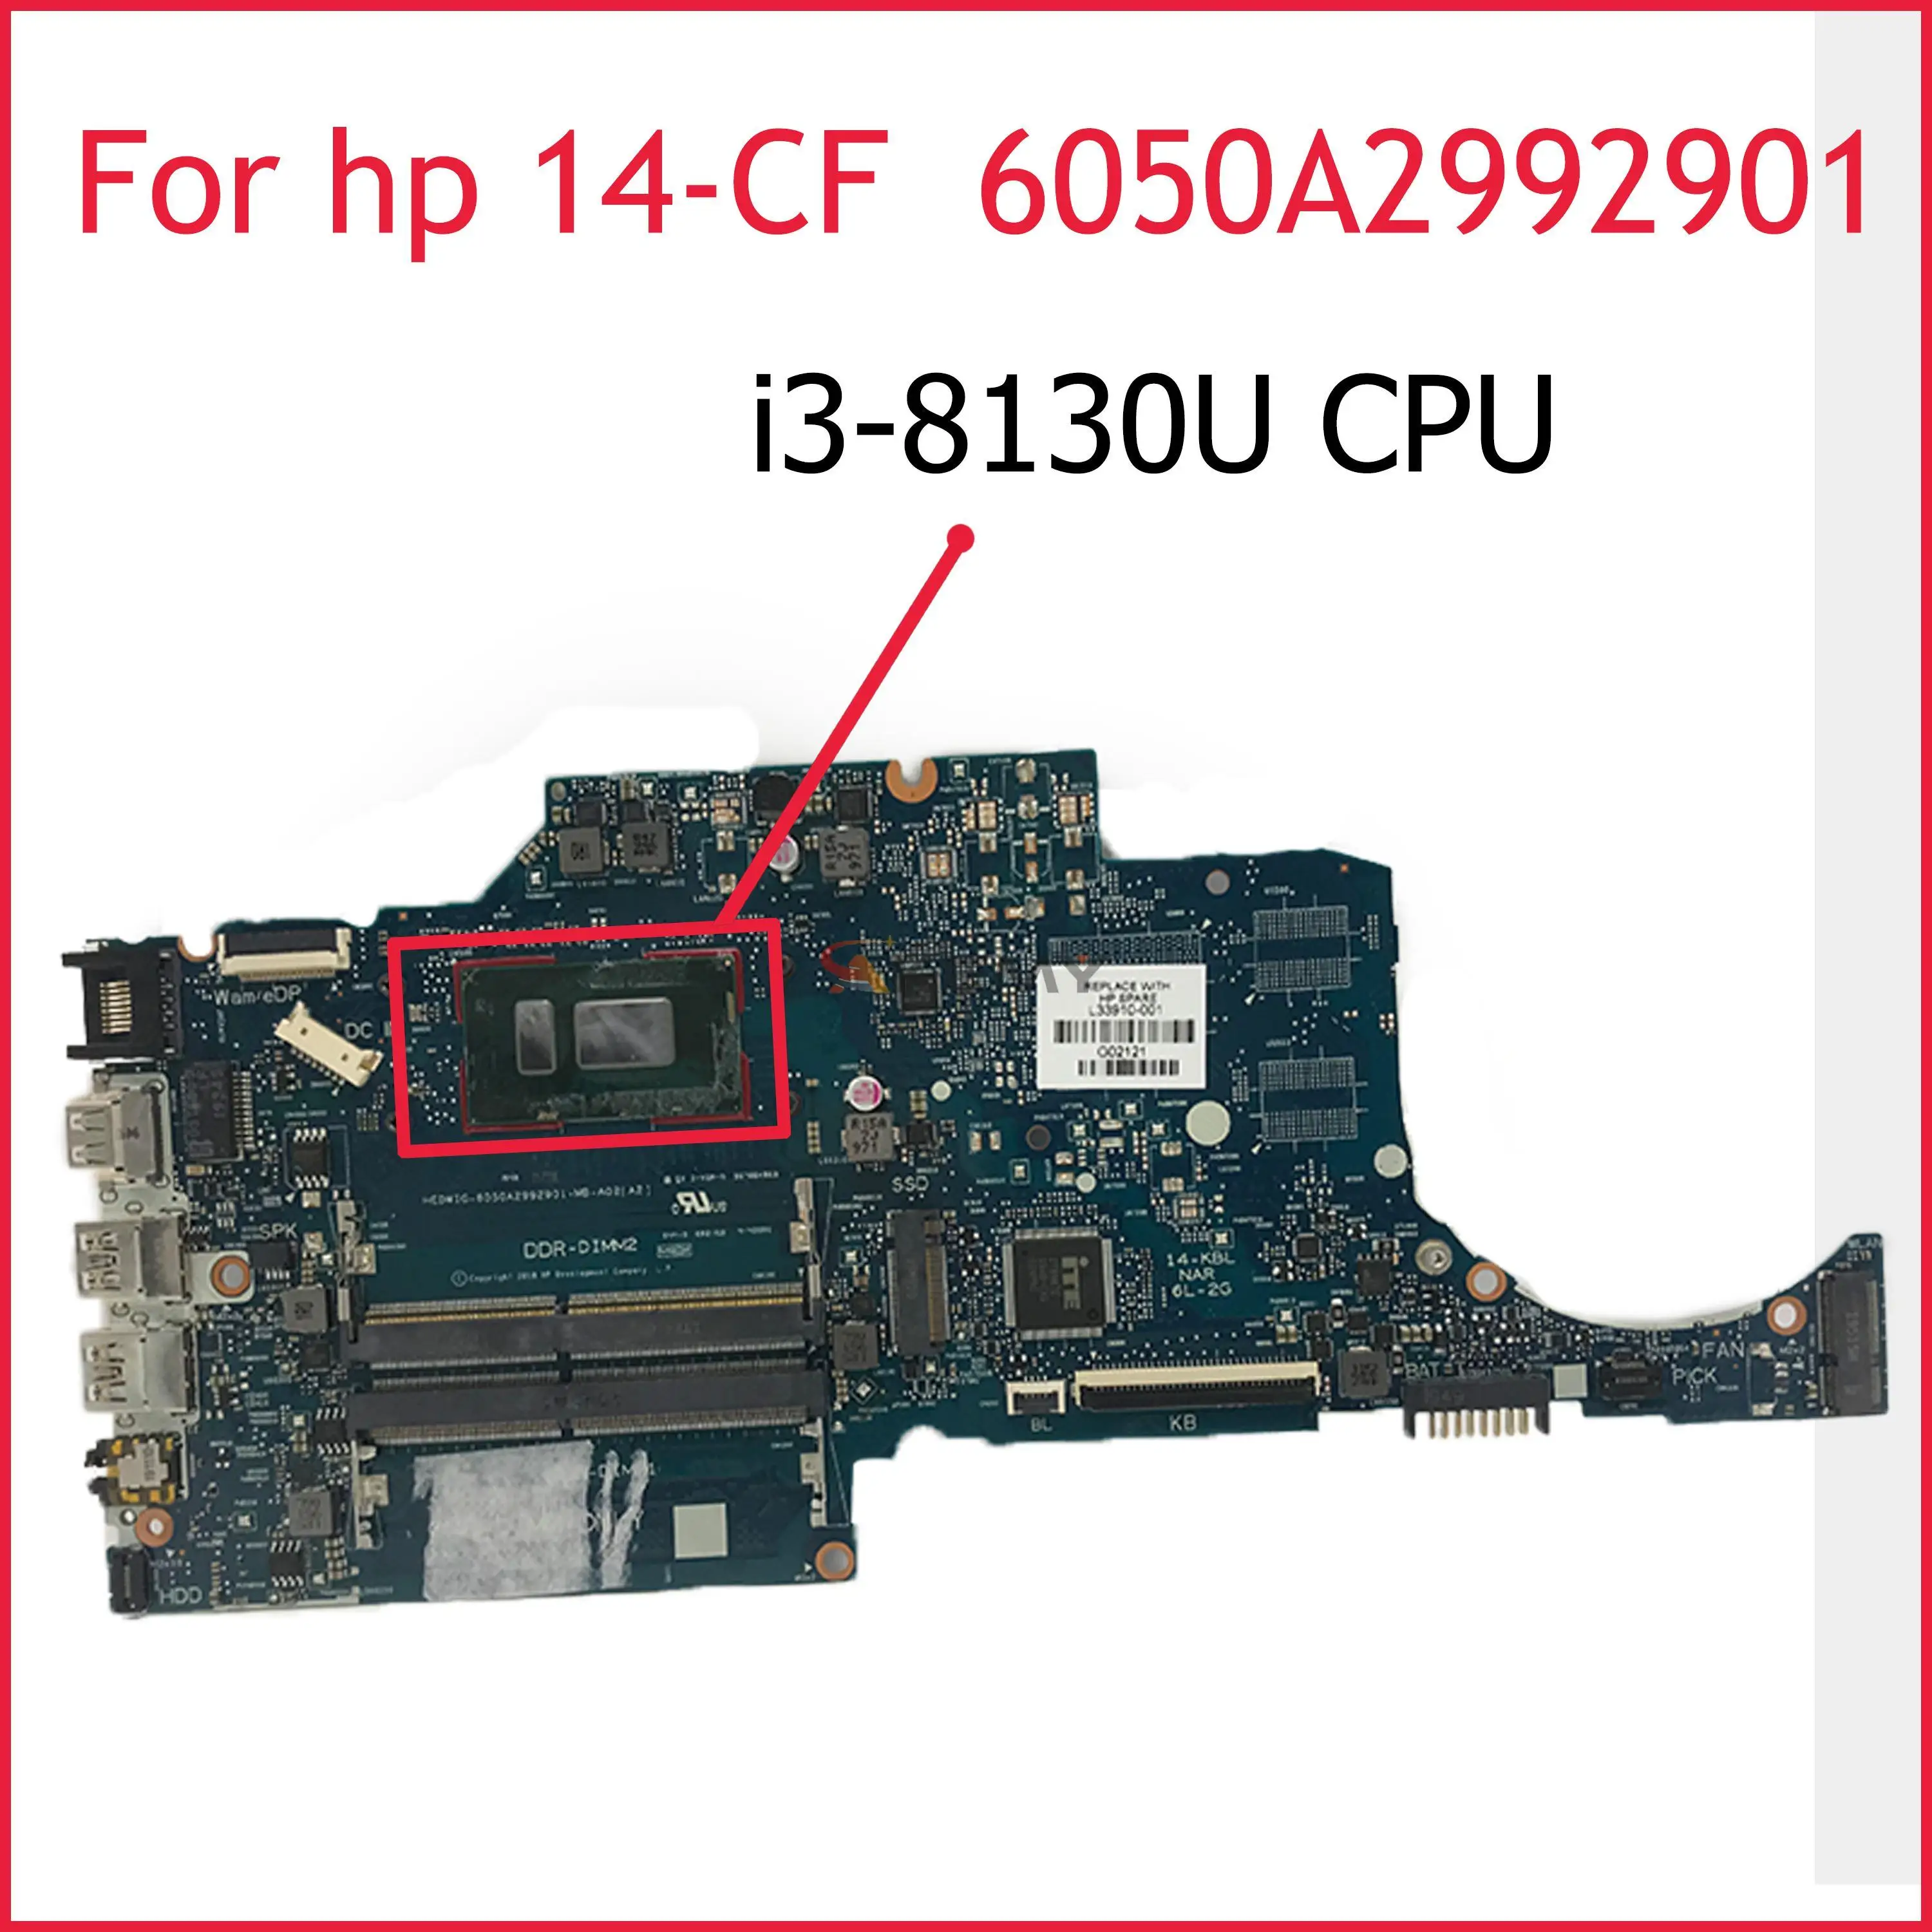 

For HP Laptop 14S-CR 14S-CF 14-CF 14-CR Mainboard L33910-601 L33910-001 HSN-I130 6050A2992901-MB-A02 With i3-8130U Fully Tested